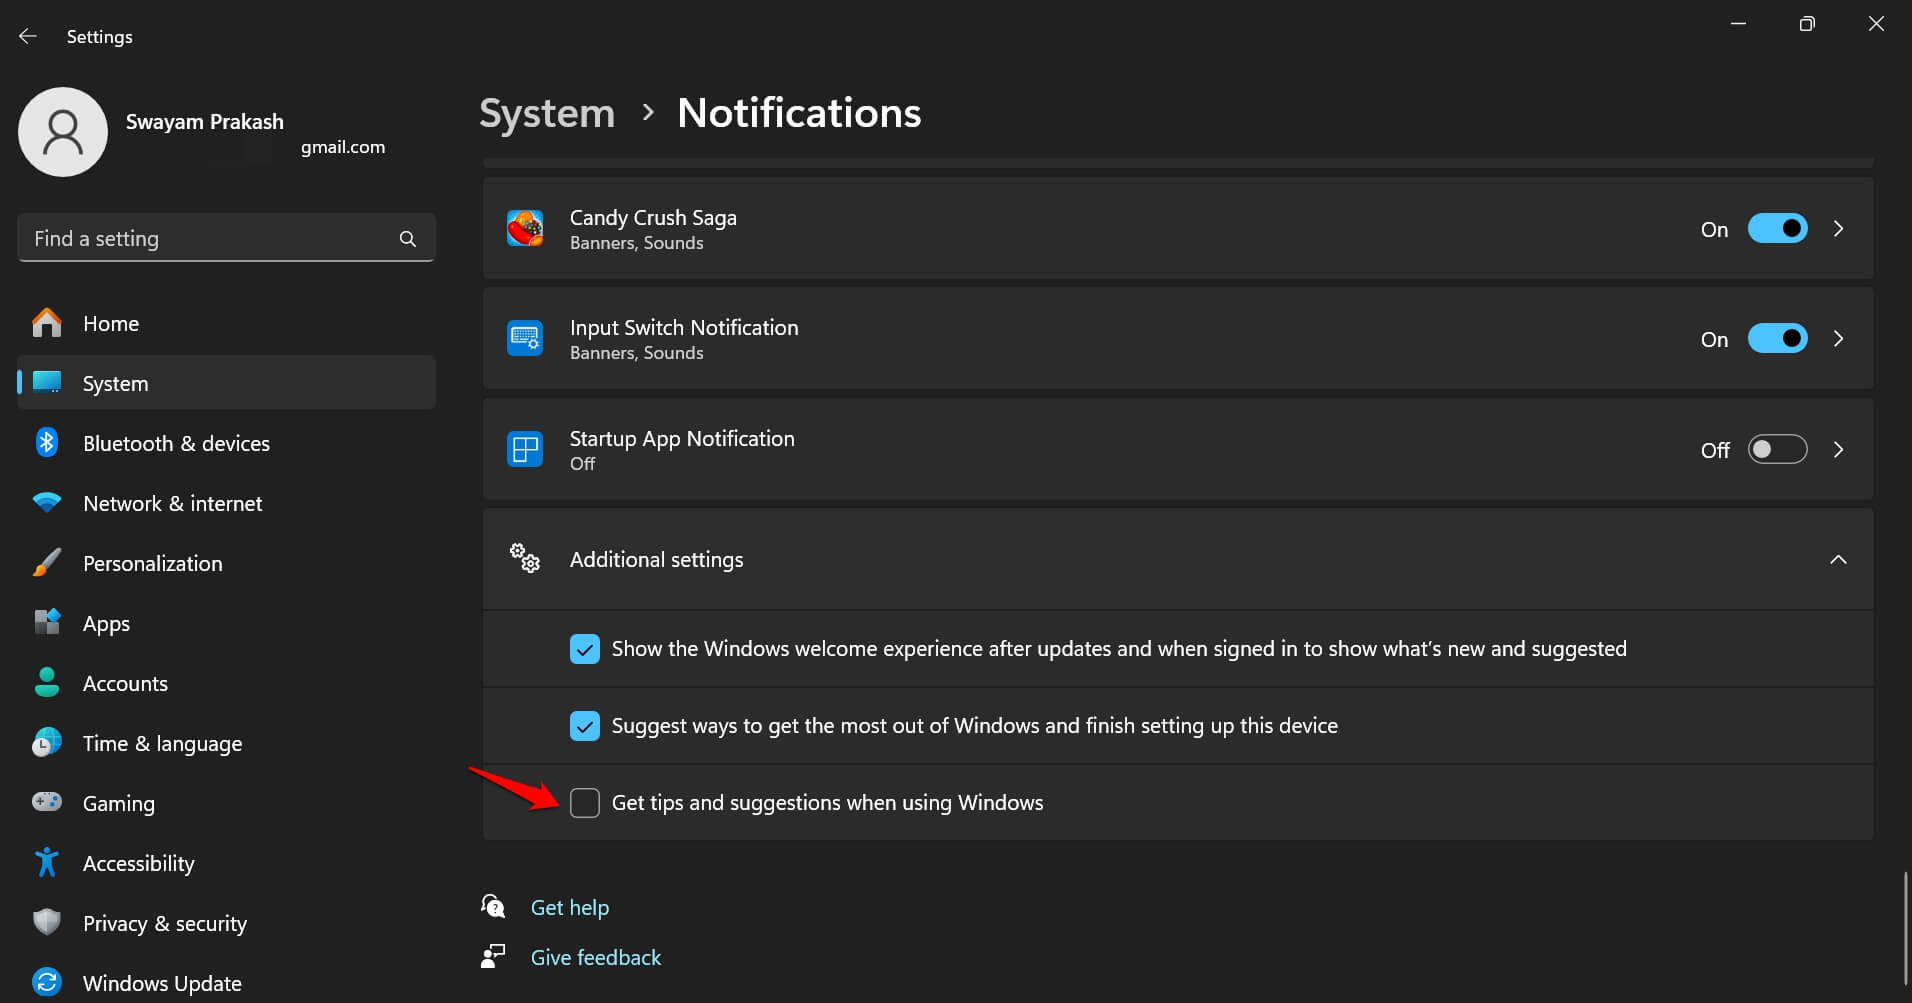 disable-tips-and-suggestions-on-Windows-11-from-settings-app